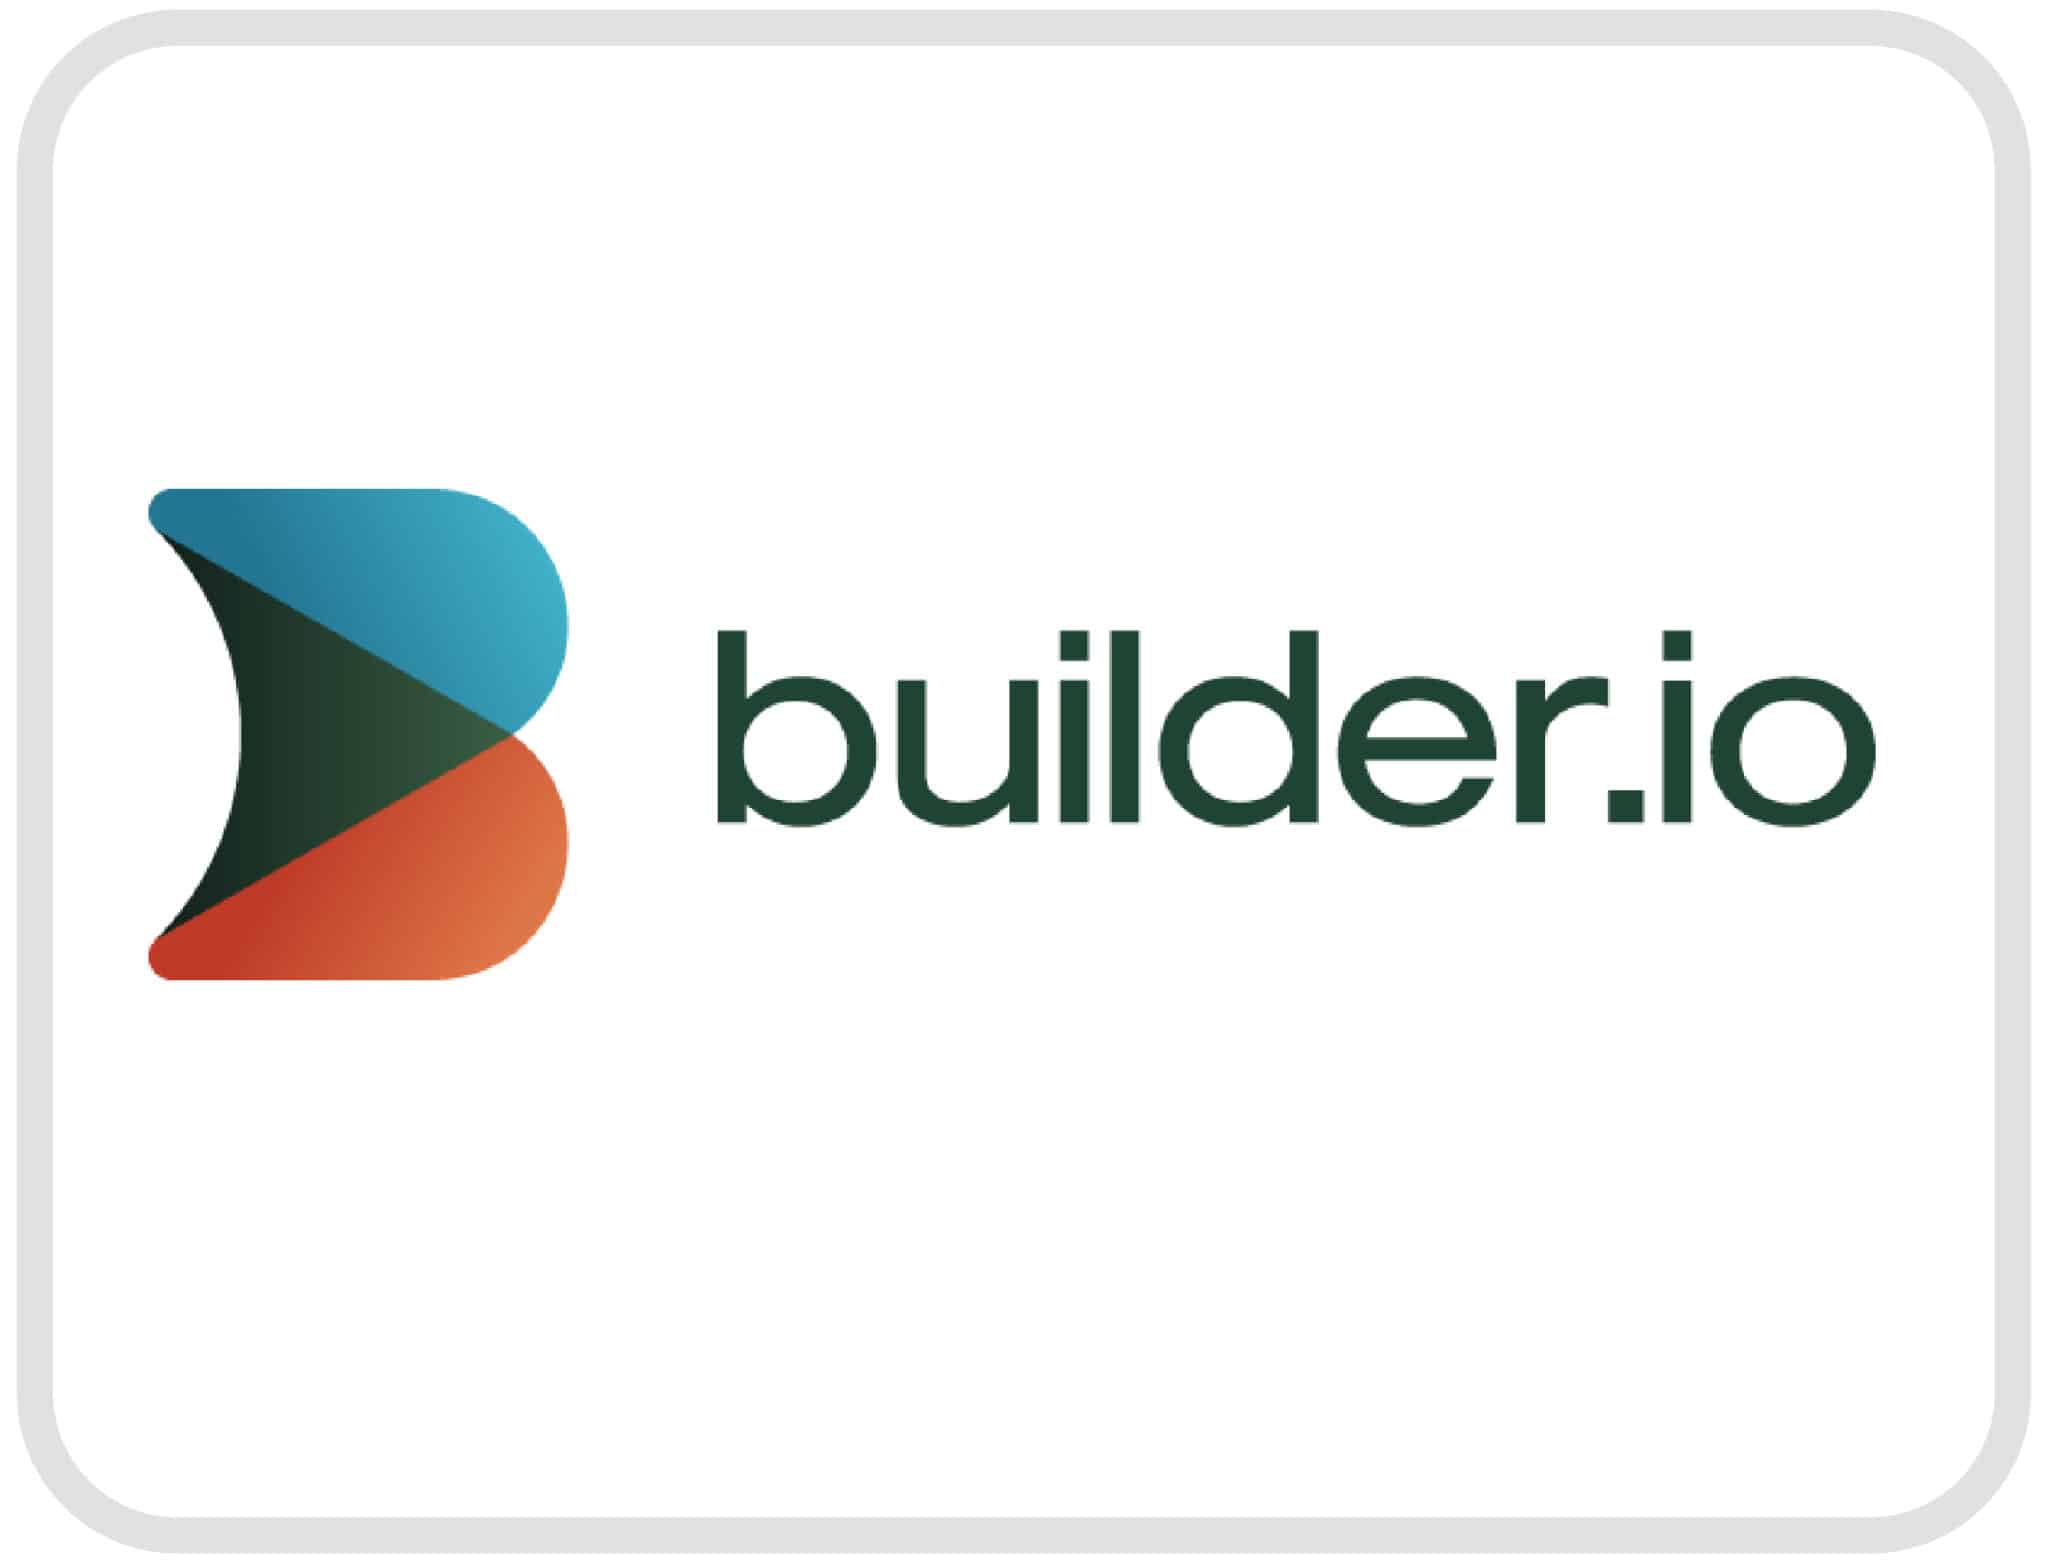 This is the builder.io logo